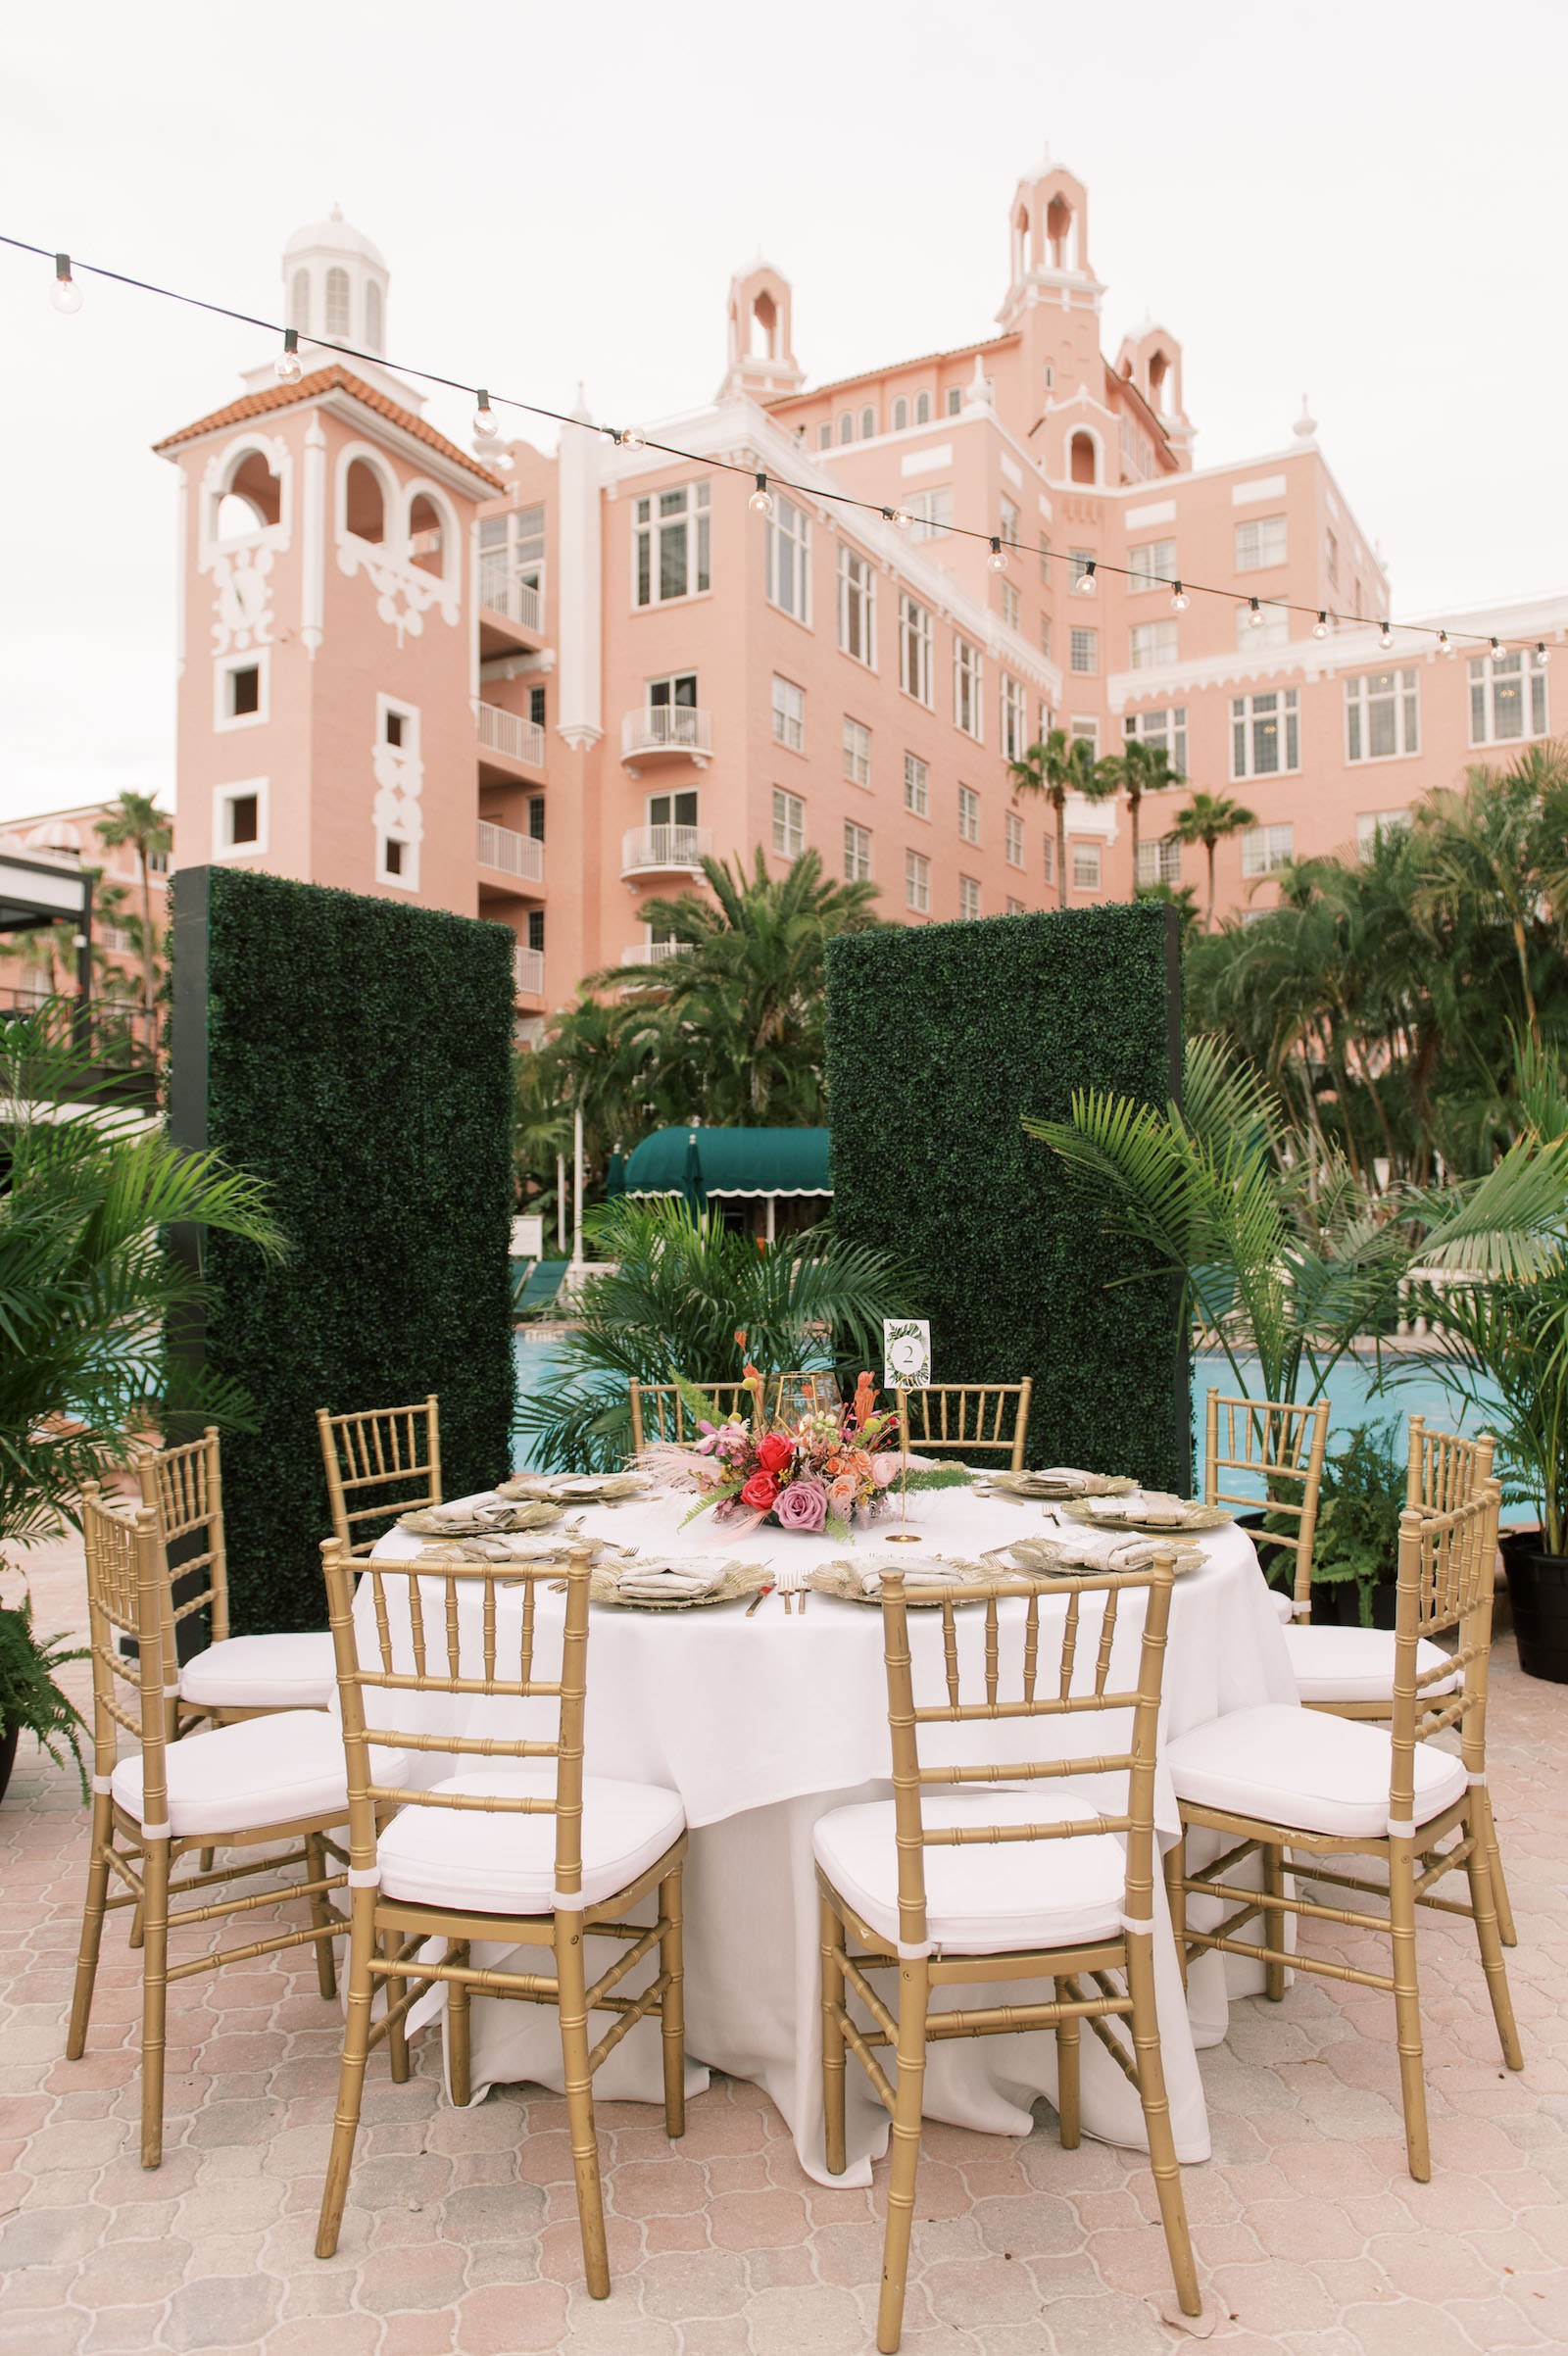 Vibrant Boho Wedding Reception Decor, White Linen Round Tables, Gold Chargers and Flatware, Low Hot Pink, Yellow and Greenery Floral Centerpiece, Greenery Hedge Walls, Hanging String Lights | St. Petersburg Waterfront Historic Wedding Venue The Don CeSar